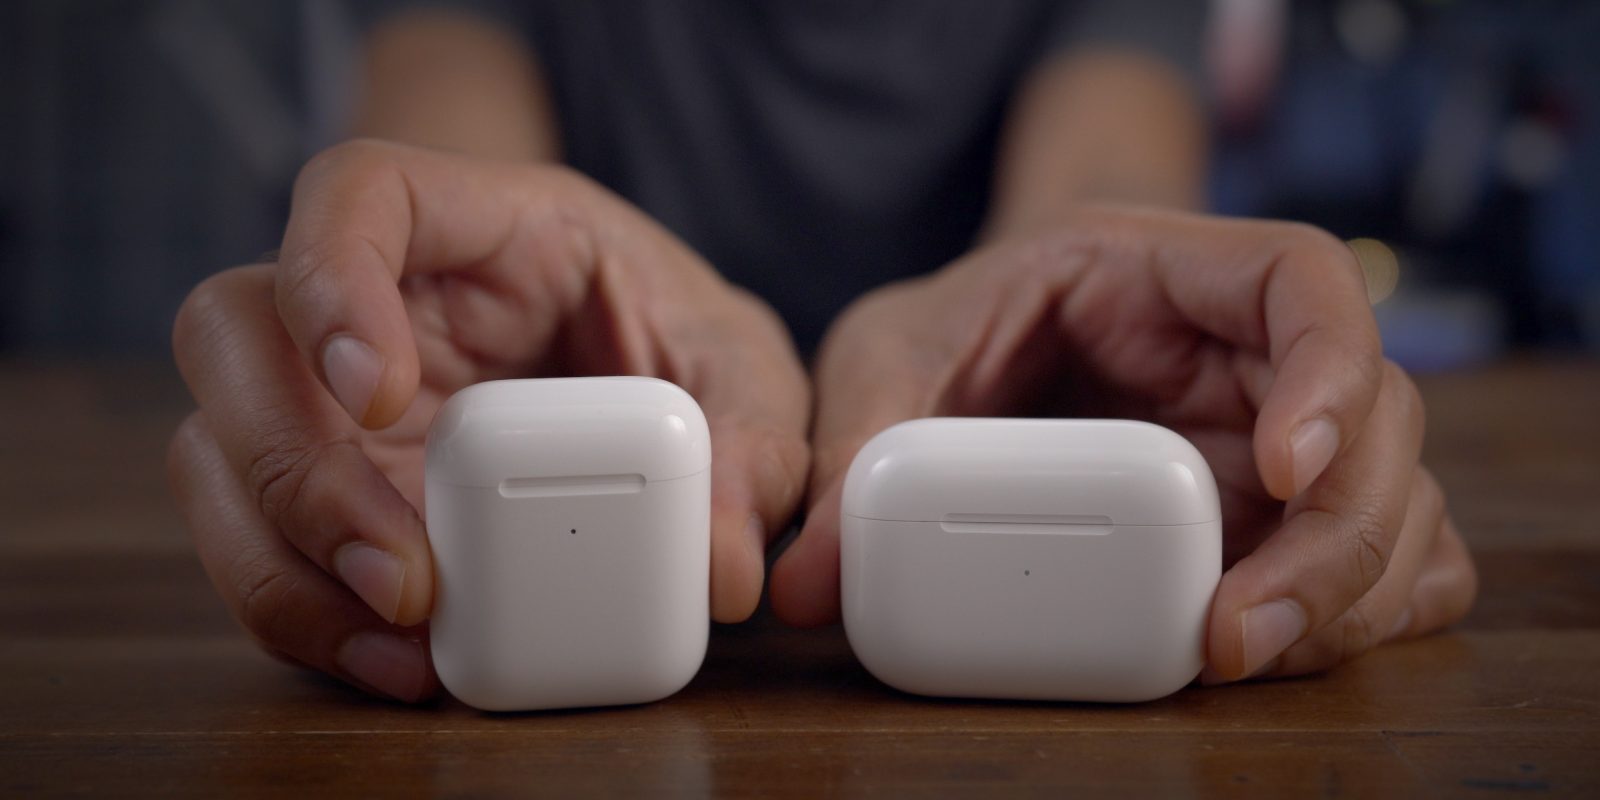 AirPods and AirPods Pro